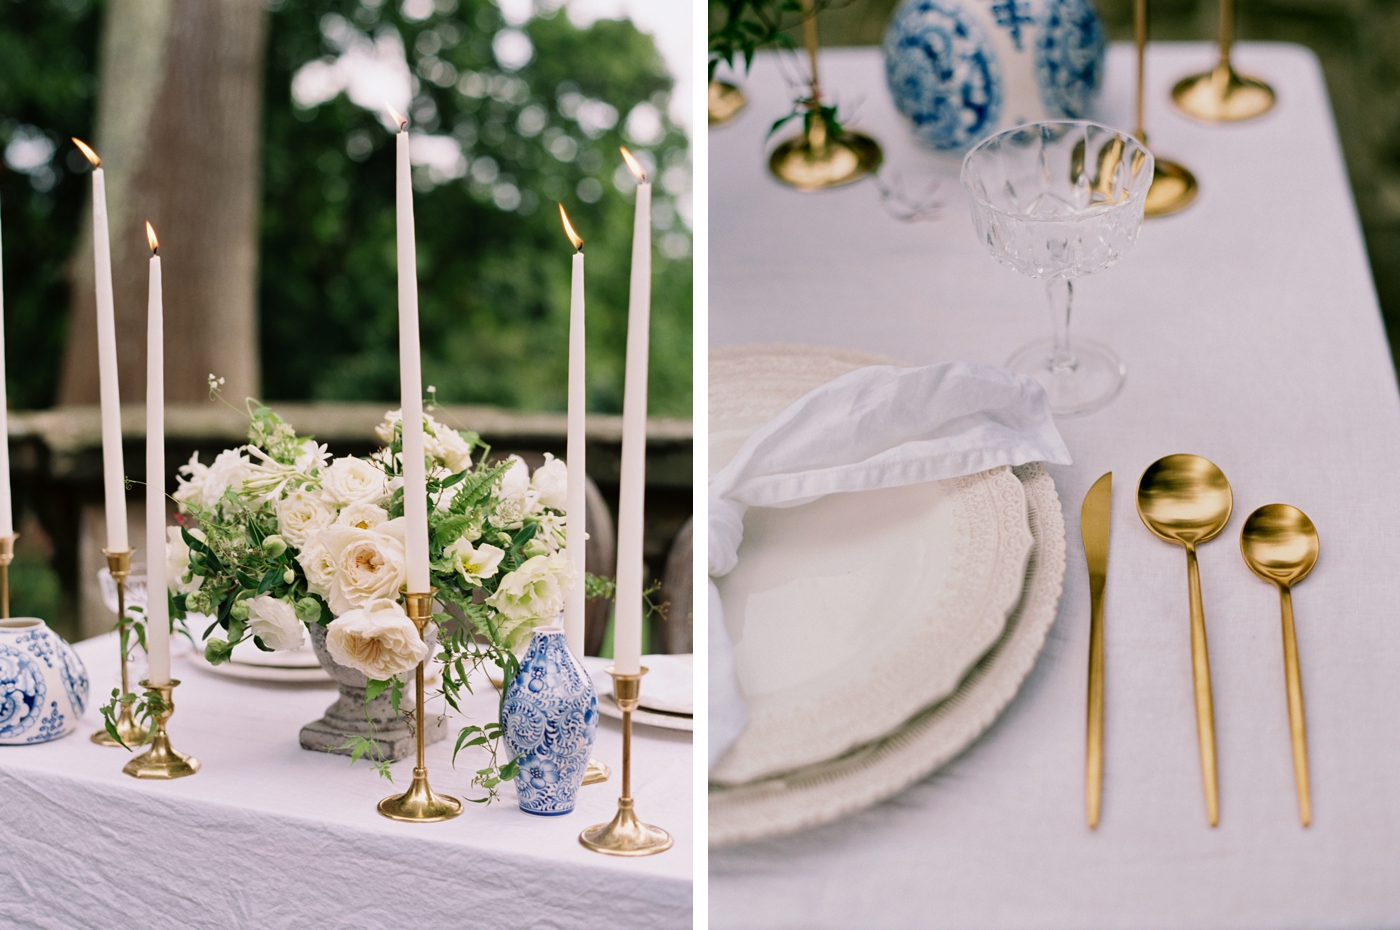 Wedding design and styling by Elle Loren + Co.